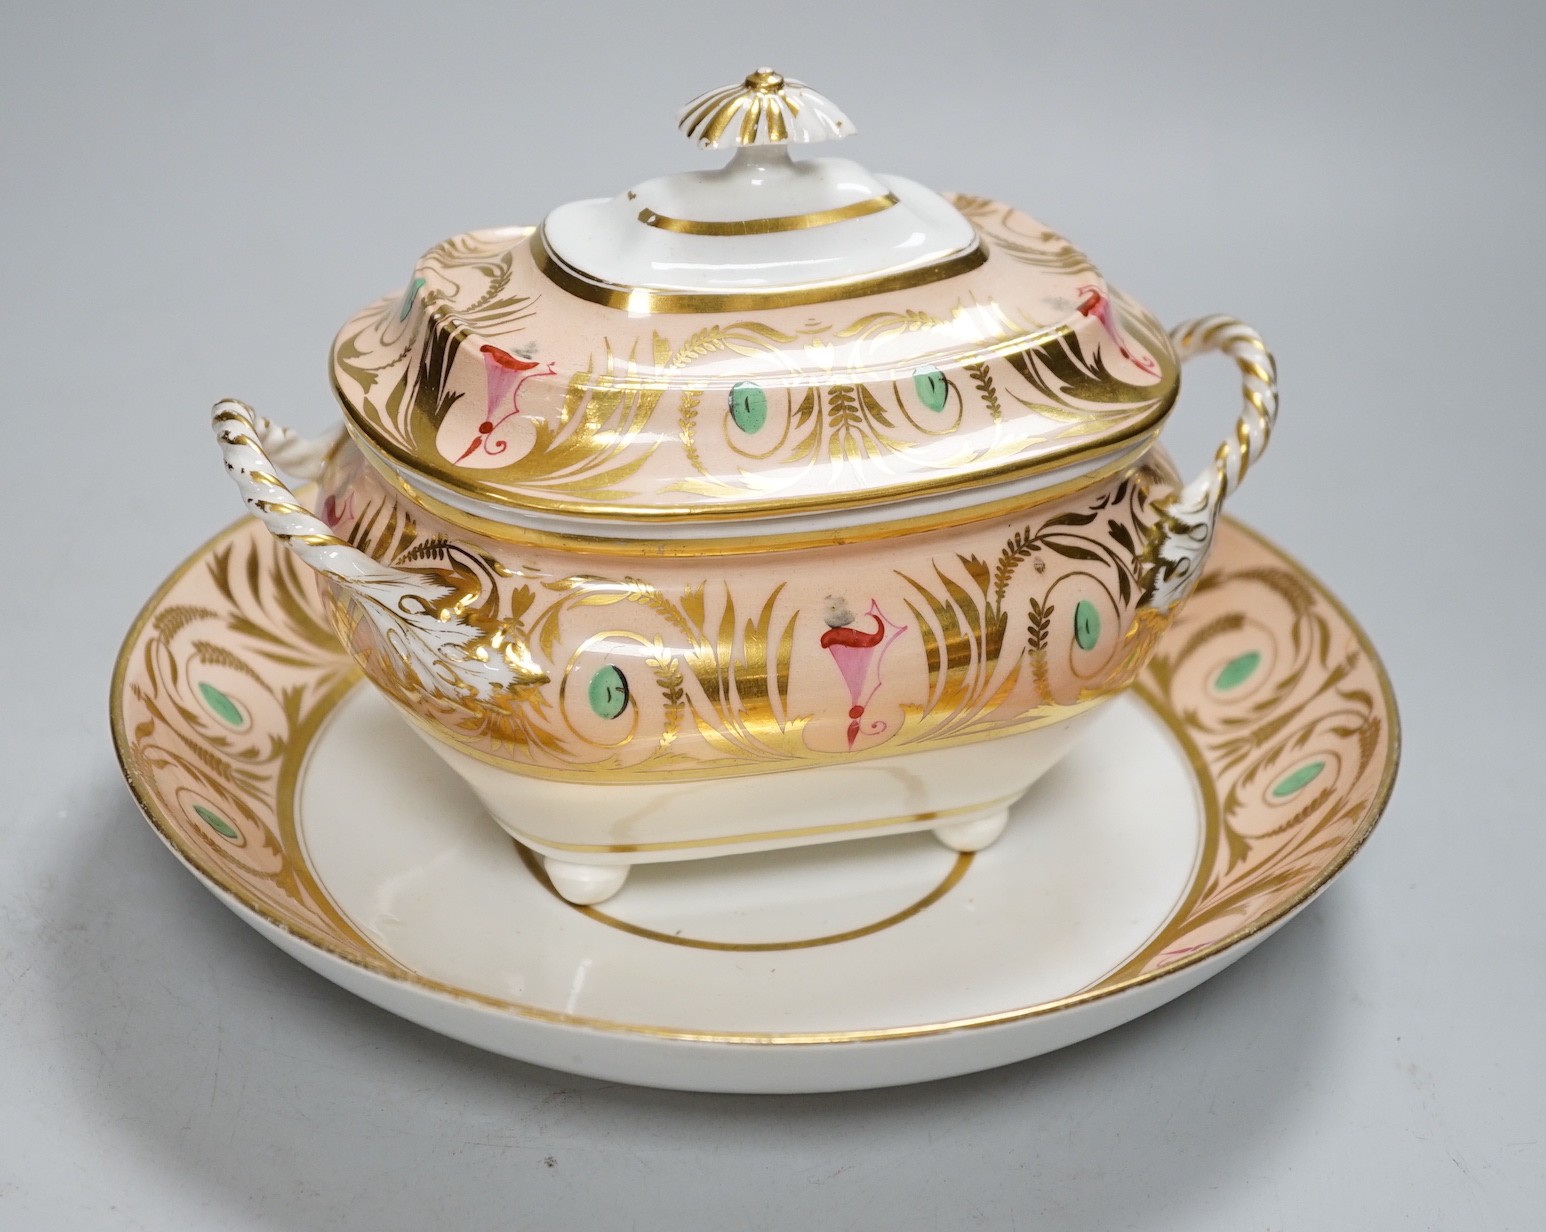 A 19th century Derby sucrier and cover and a matching saucer dish decorated in neo-classical style on a salmon coloured ground, red mark. 15cm tall overall